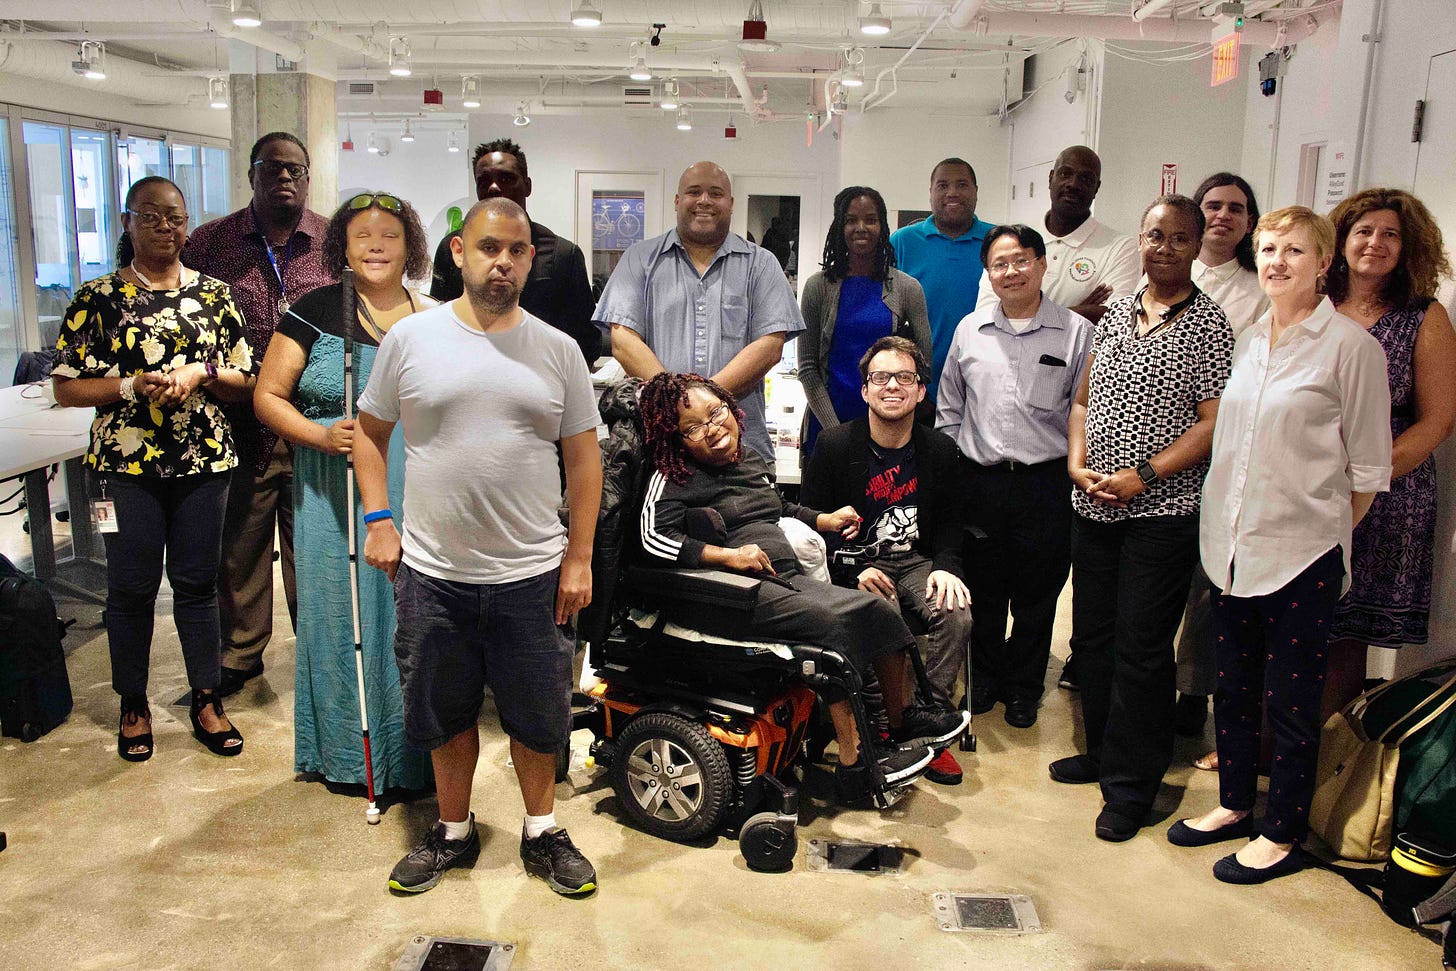 2Gether International aims to strengthen the community of entrepreneurs with disabilities.